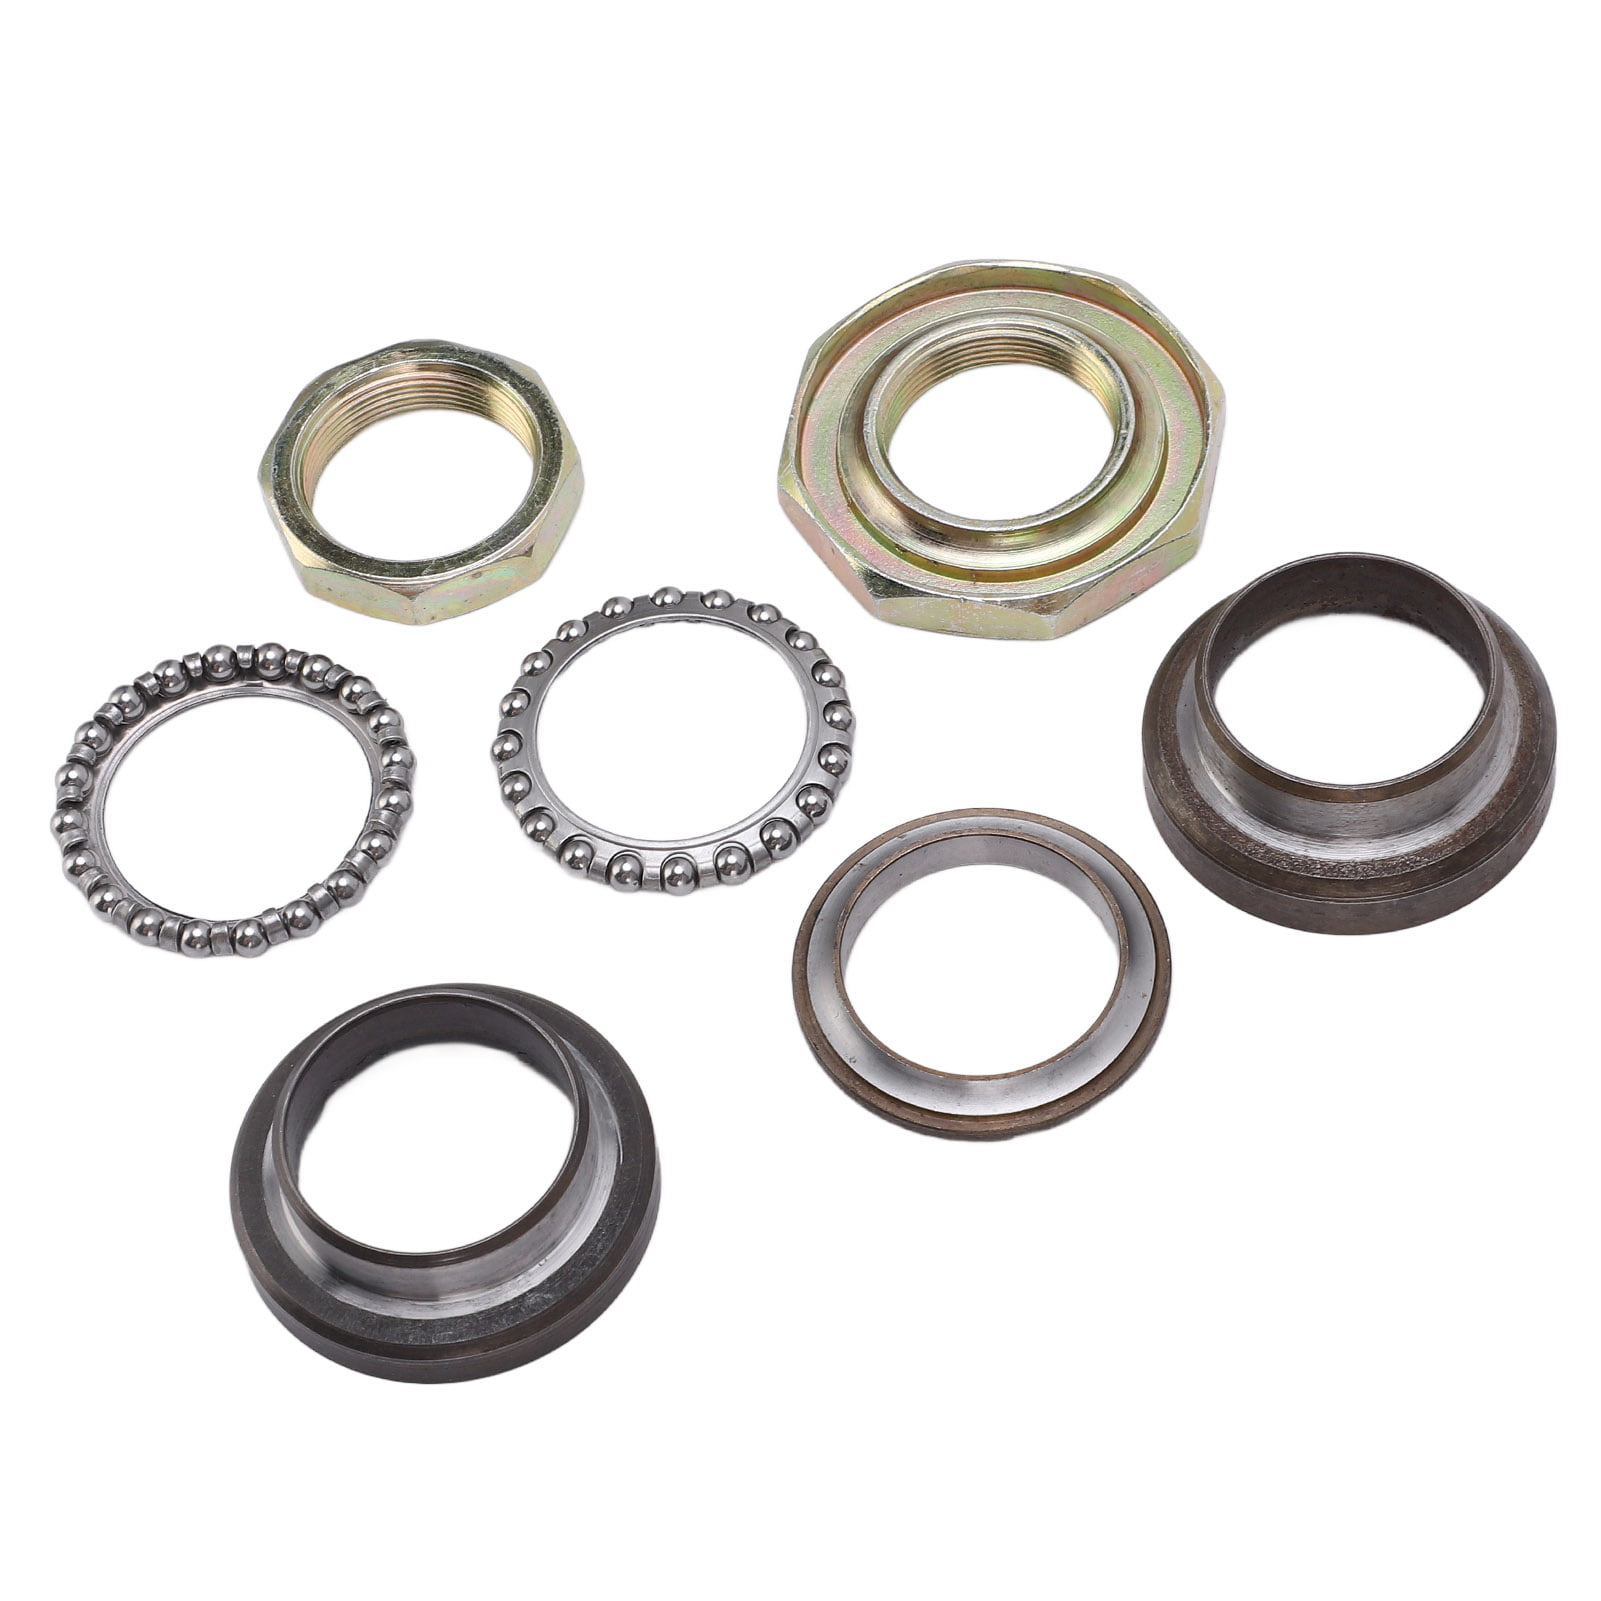 Steering Stem Bearing Kit Motorcycle Front Fork Steering Stem Bearings Kit Steel Alloy Replacement for GY6‑50/60/80CC Go Karts Scooters ATV UTV 